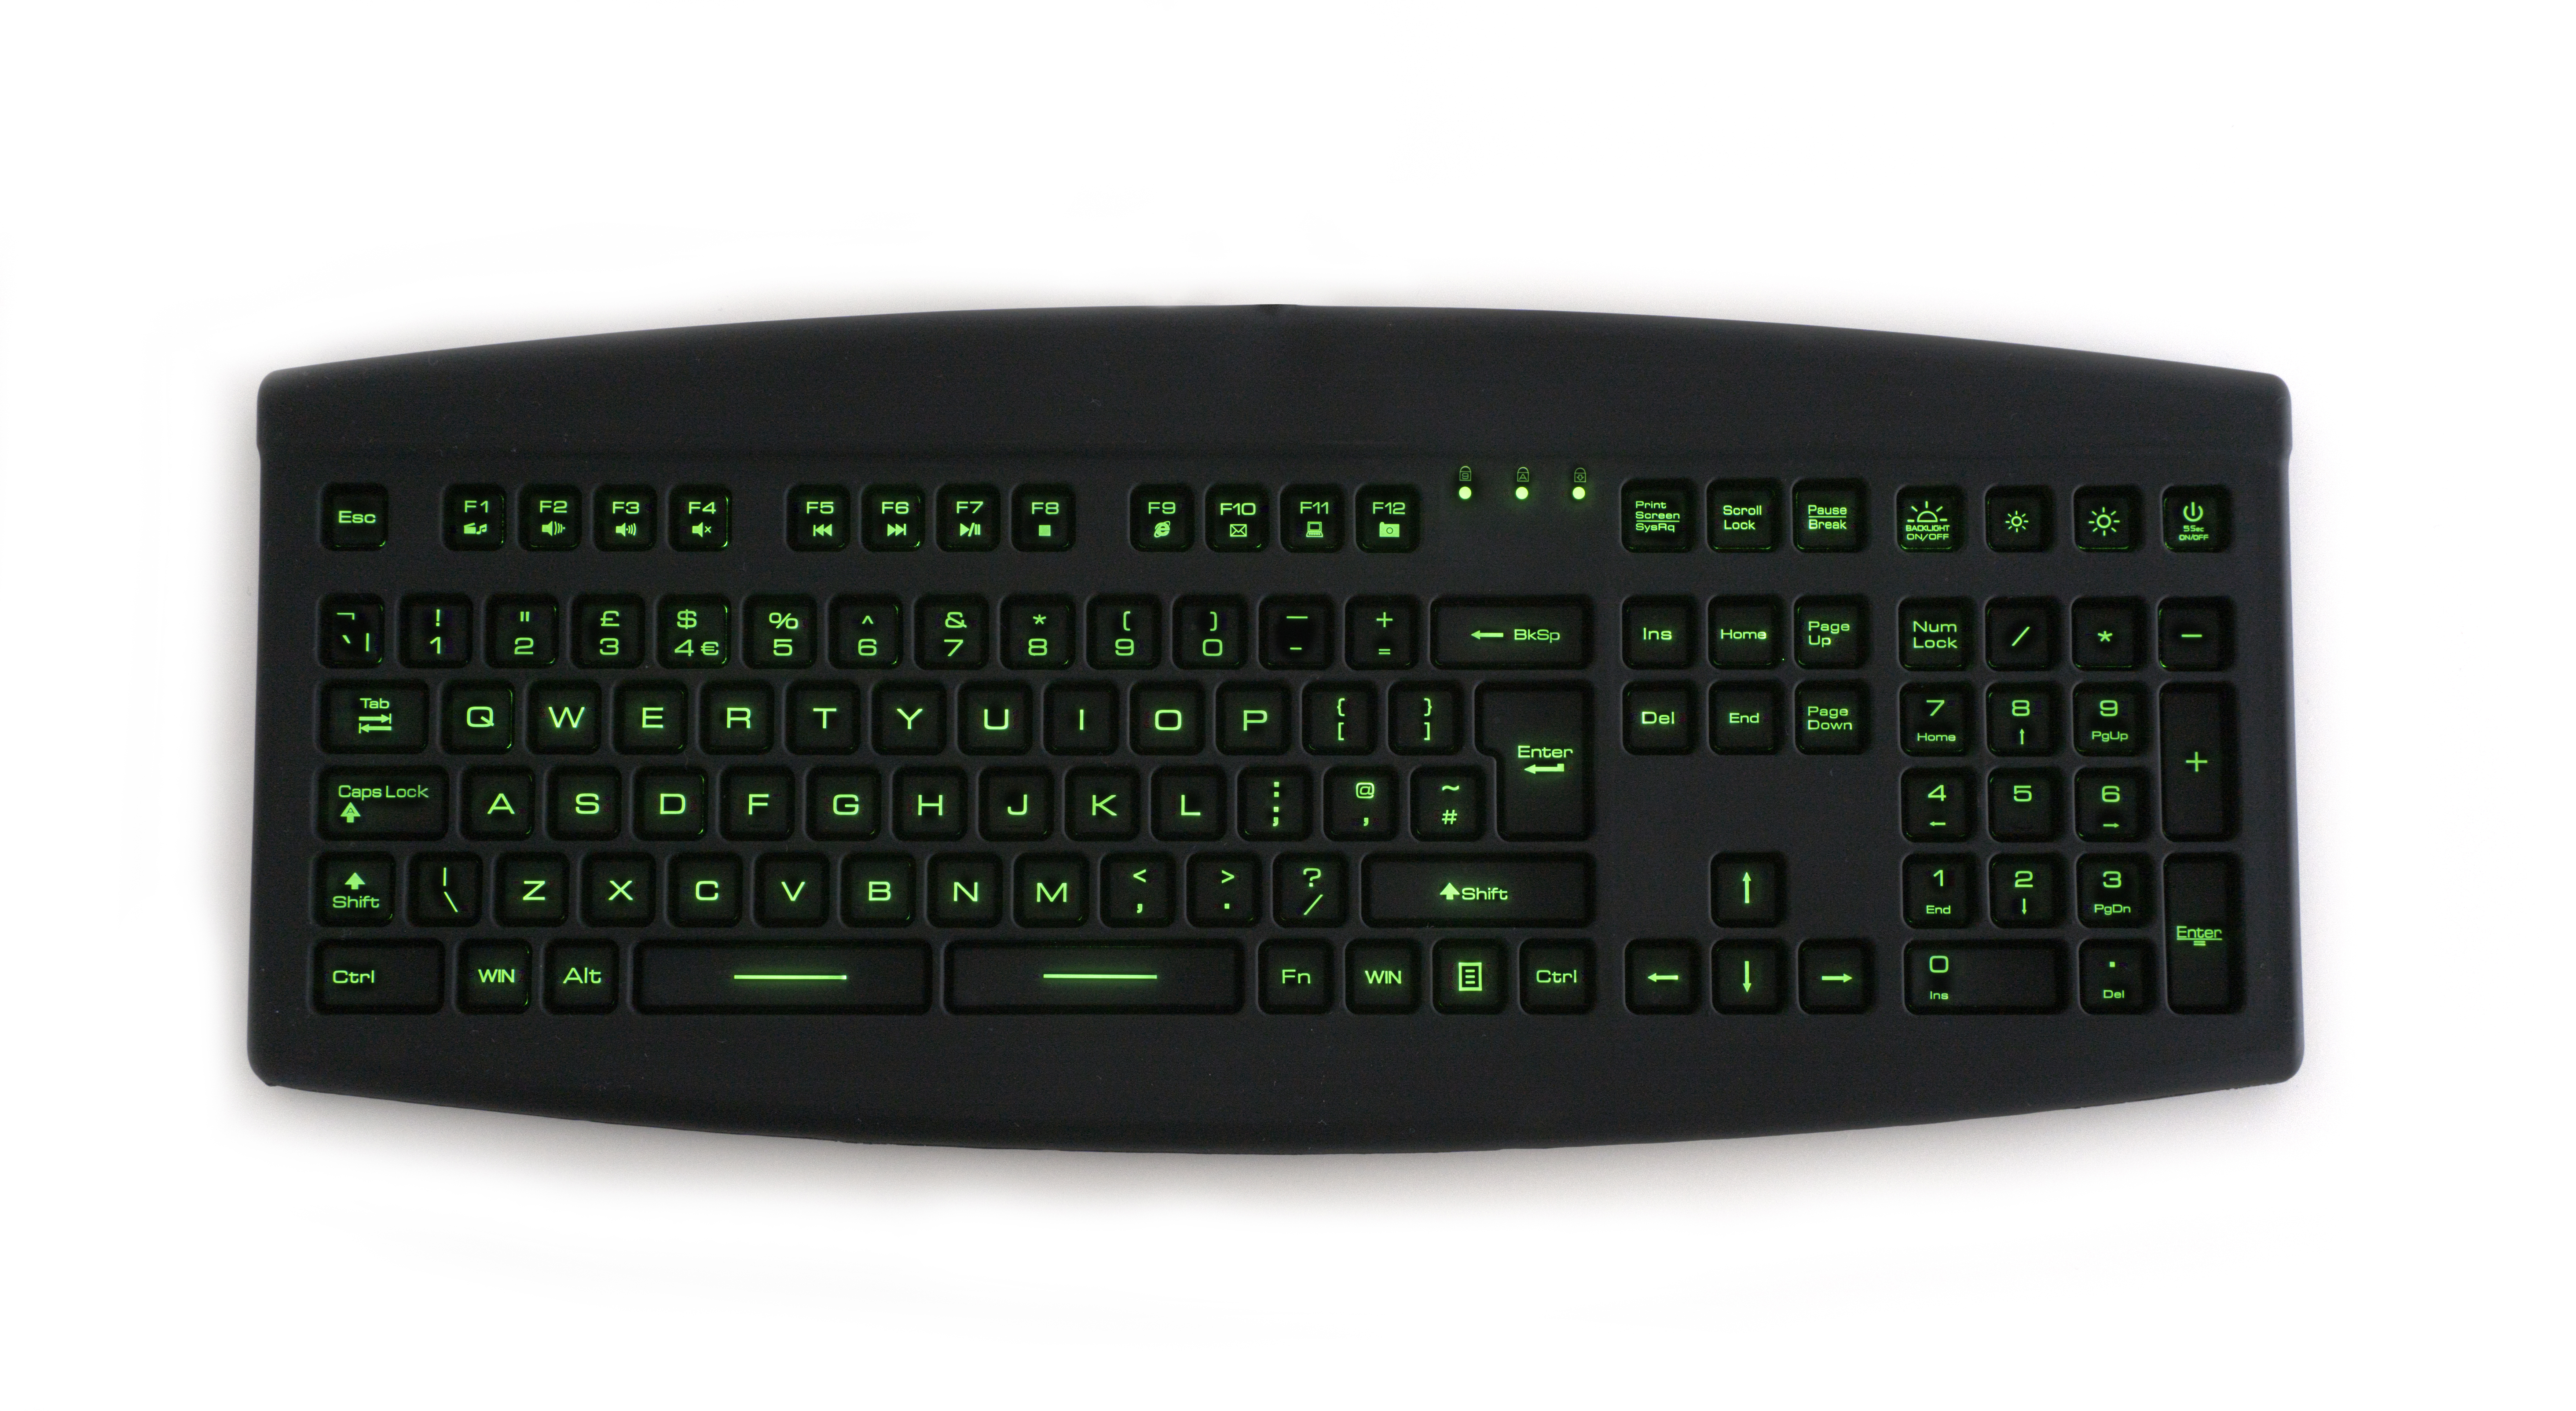 A black keyboard with sunken keys. The keyboard is made from black silicone and having each key sunken means that it gives the advantage of a keyguard but without the need for two separate components. The character on each key is white, but the keyboard has a green backlight. The keys are sunken by around 6 milli metres.

End of description.